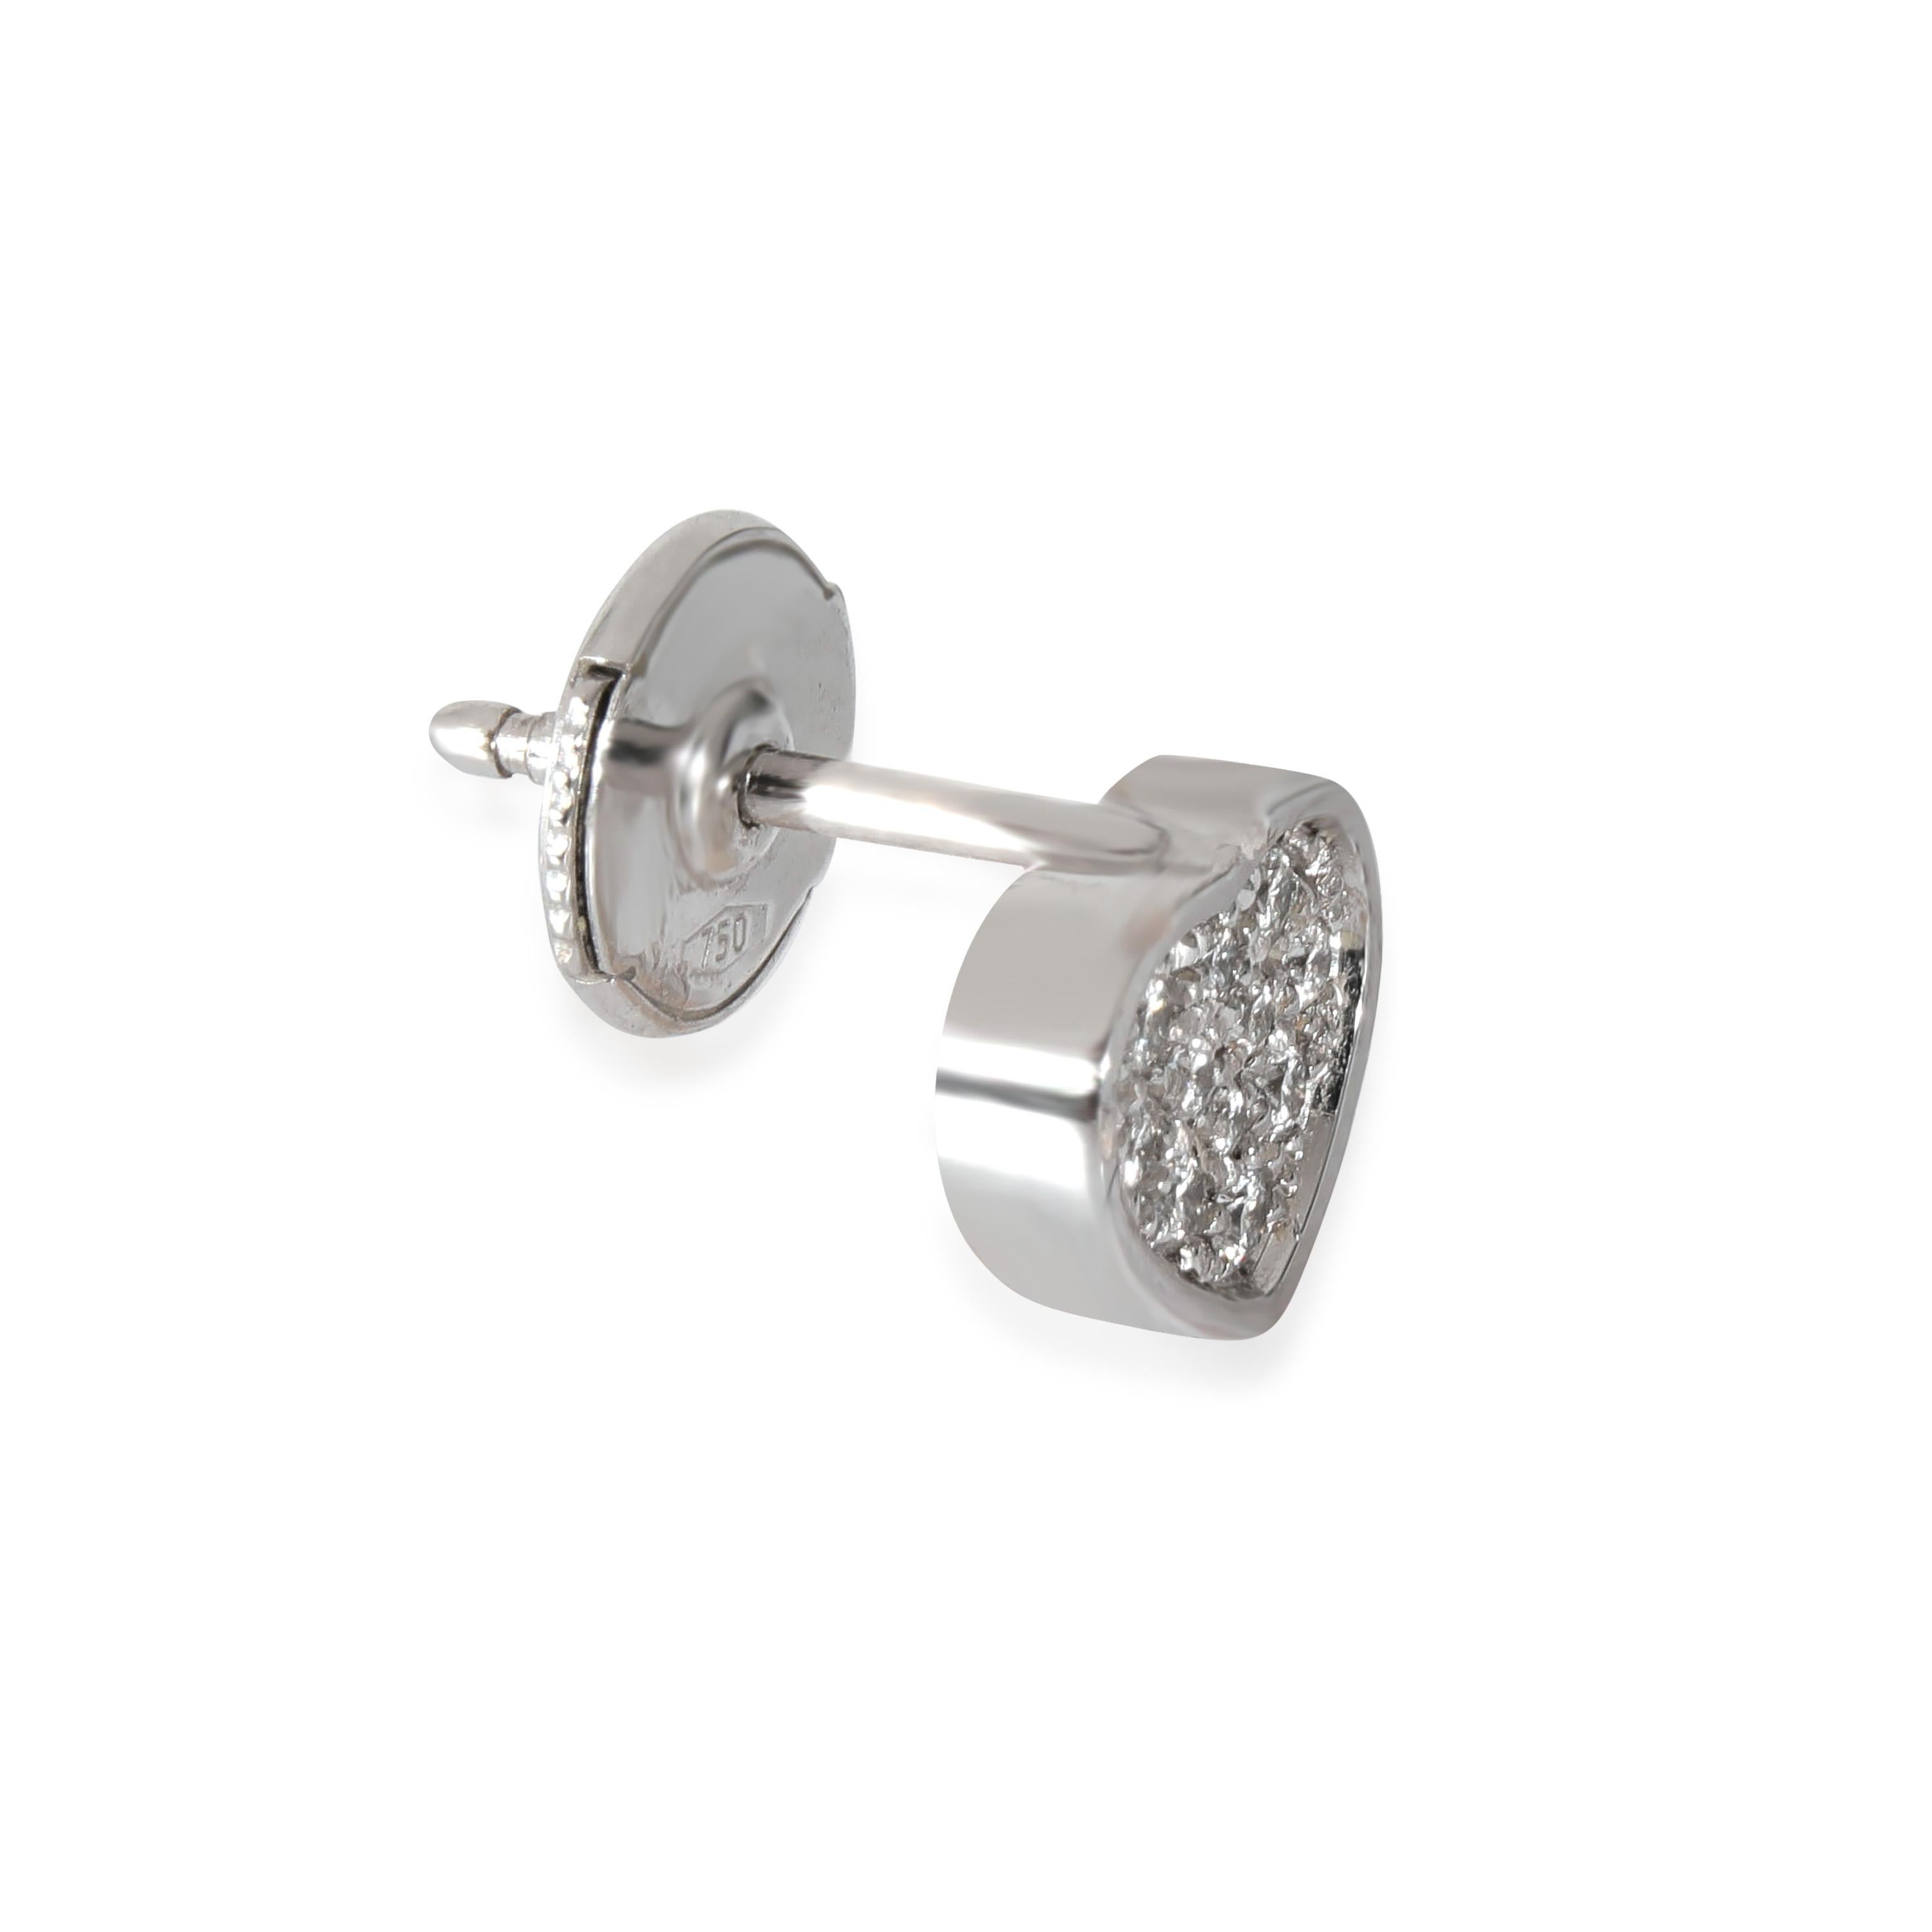 18k White Gold Chopard My Happy Hearts Diamond Single Stud Earring, 0.12ctw

PRIMARY DETAILS
SKU: 132507
Listing Title: 18k White Gold Chopard My Happy Hearts Diamond Single Stud Earring, 0.12ctw
Condition Description: A celebration of small